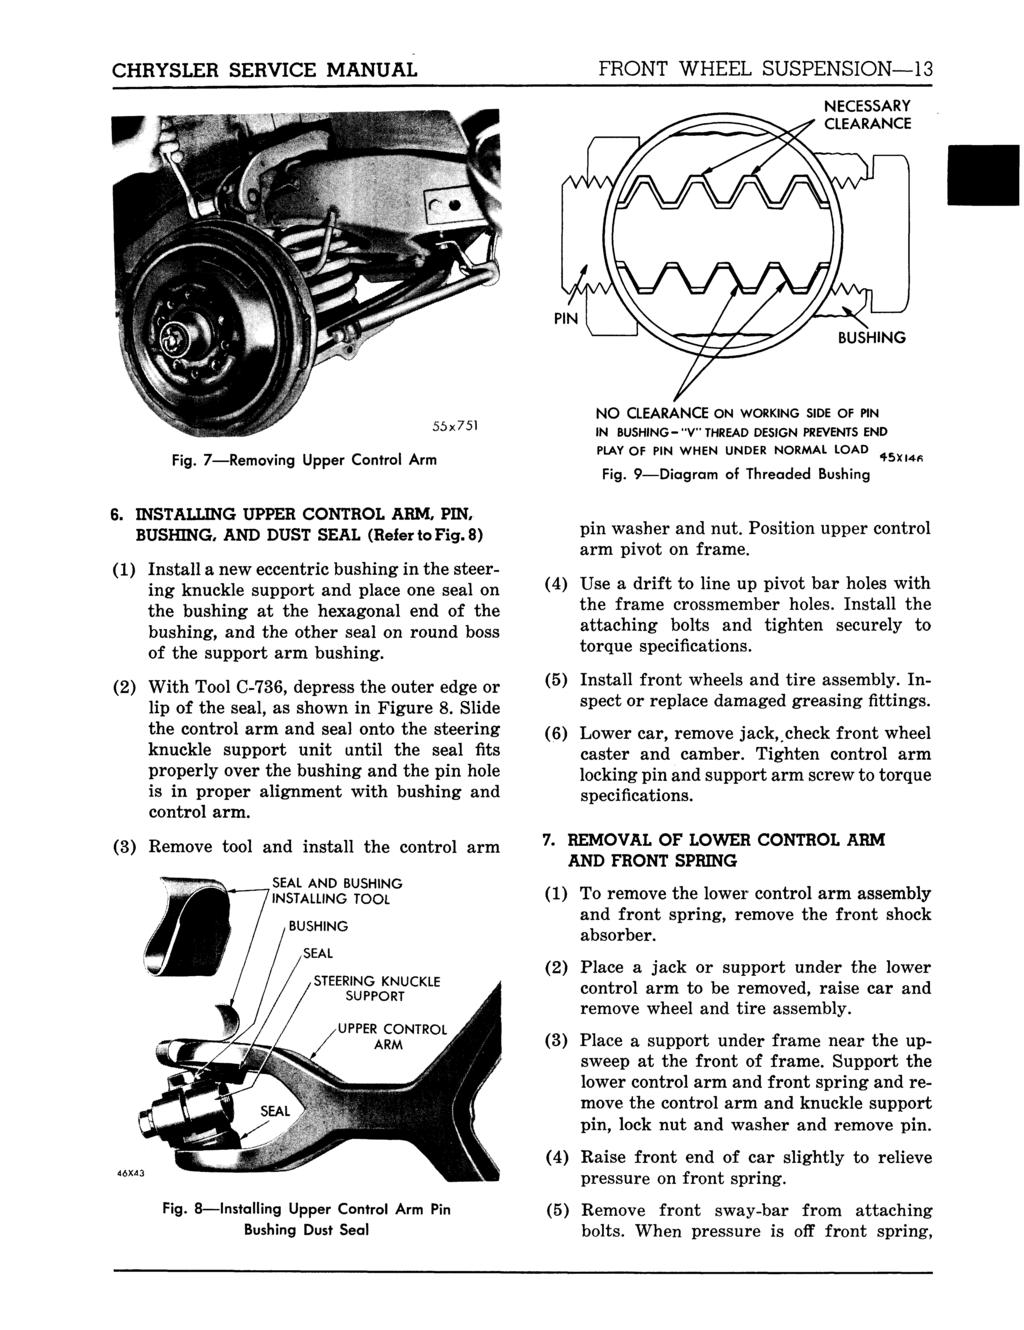 CHRYSLER SERVICE MANUAL FRONT WHEEL SUSPENSION 13 NECESSARY CLEARANCE BUSHING Fig. 7 Removing Upper Control Arm 55x75\ 6. INSTALLING UPPER CONTROL ARM, PIN, BUSHING, AND DUST SEAL (Refer to Fig.